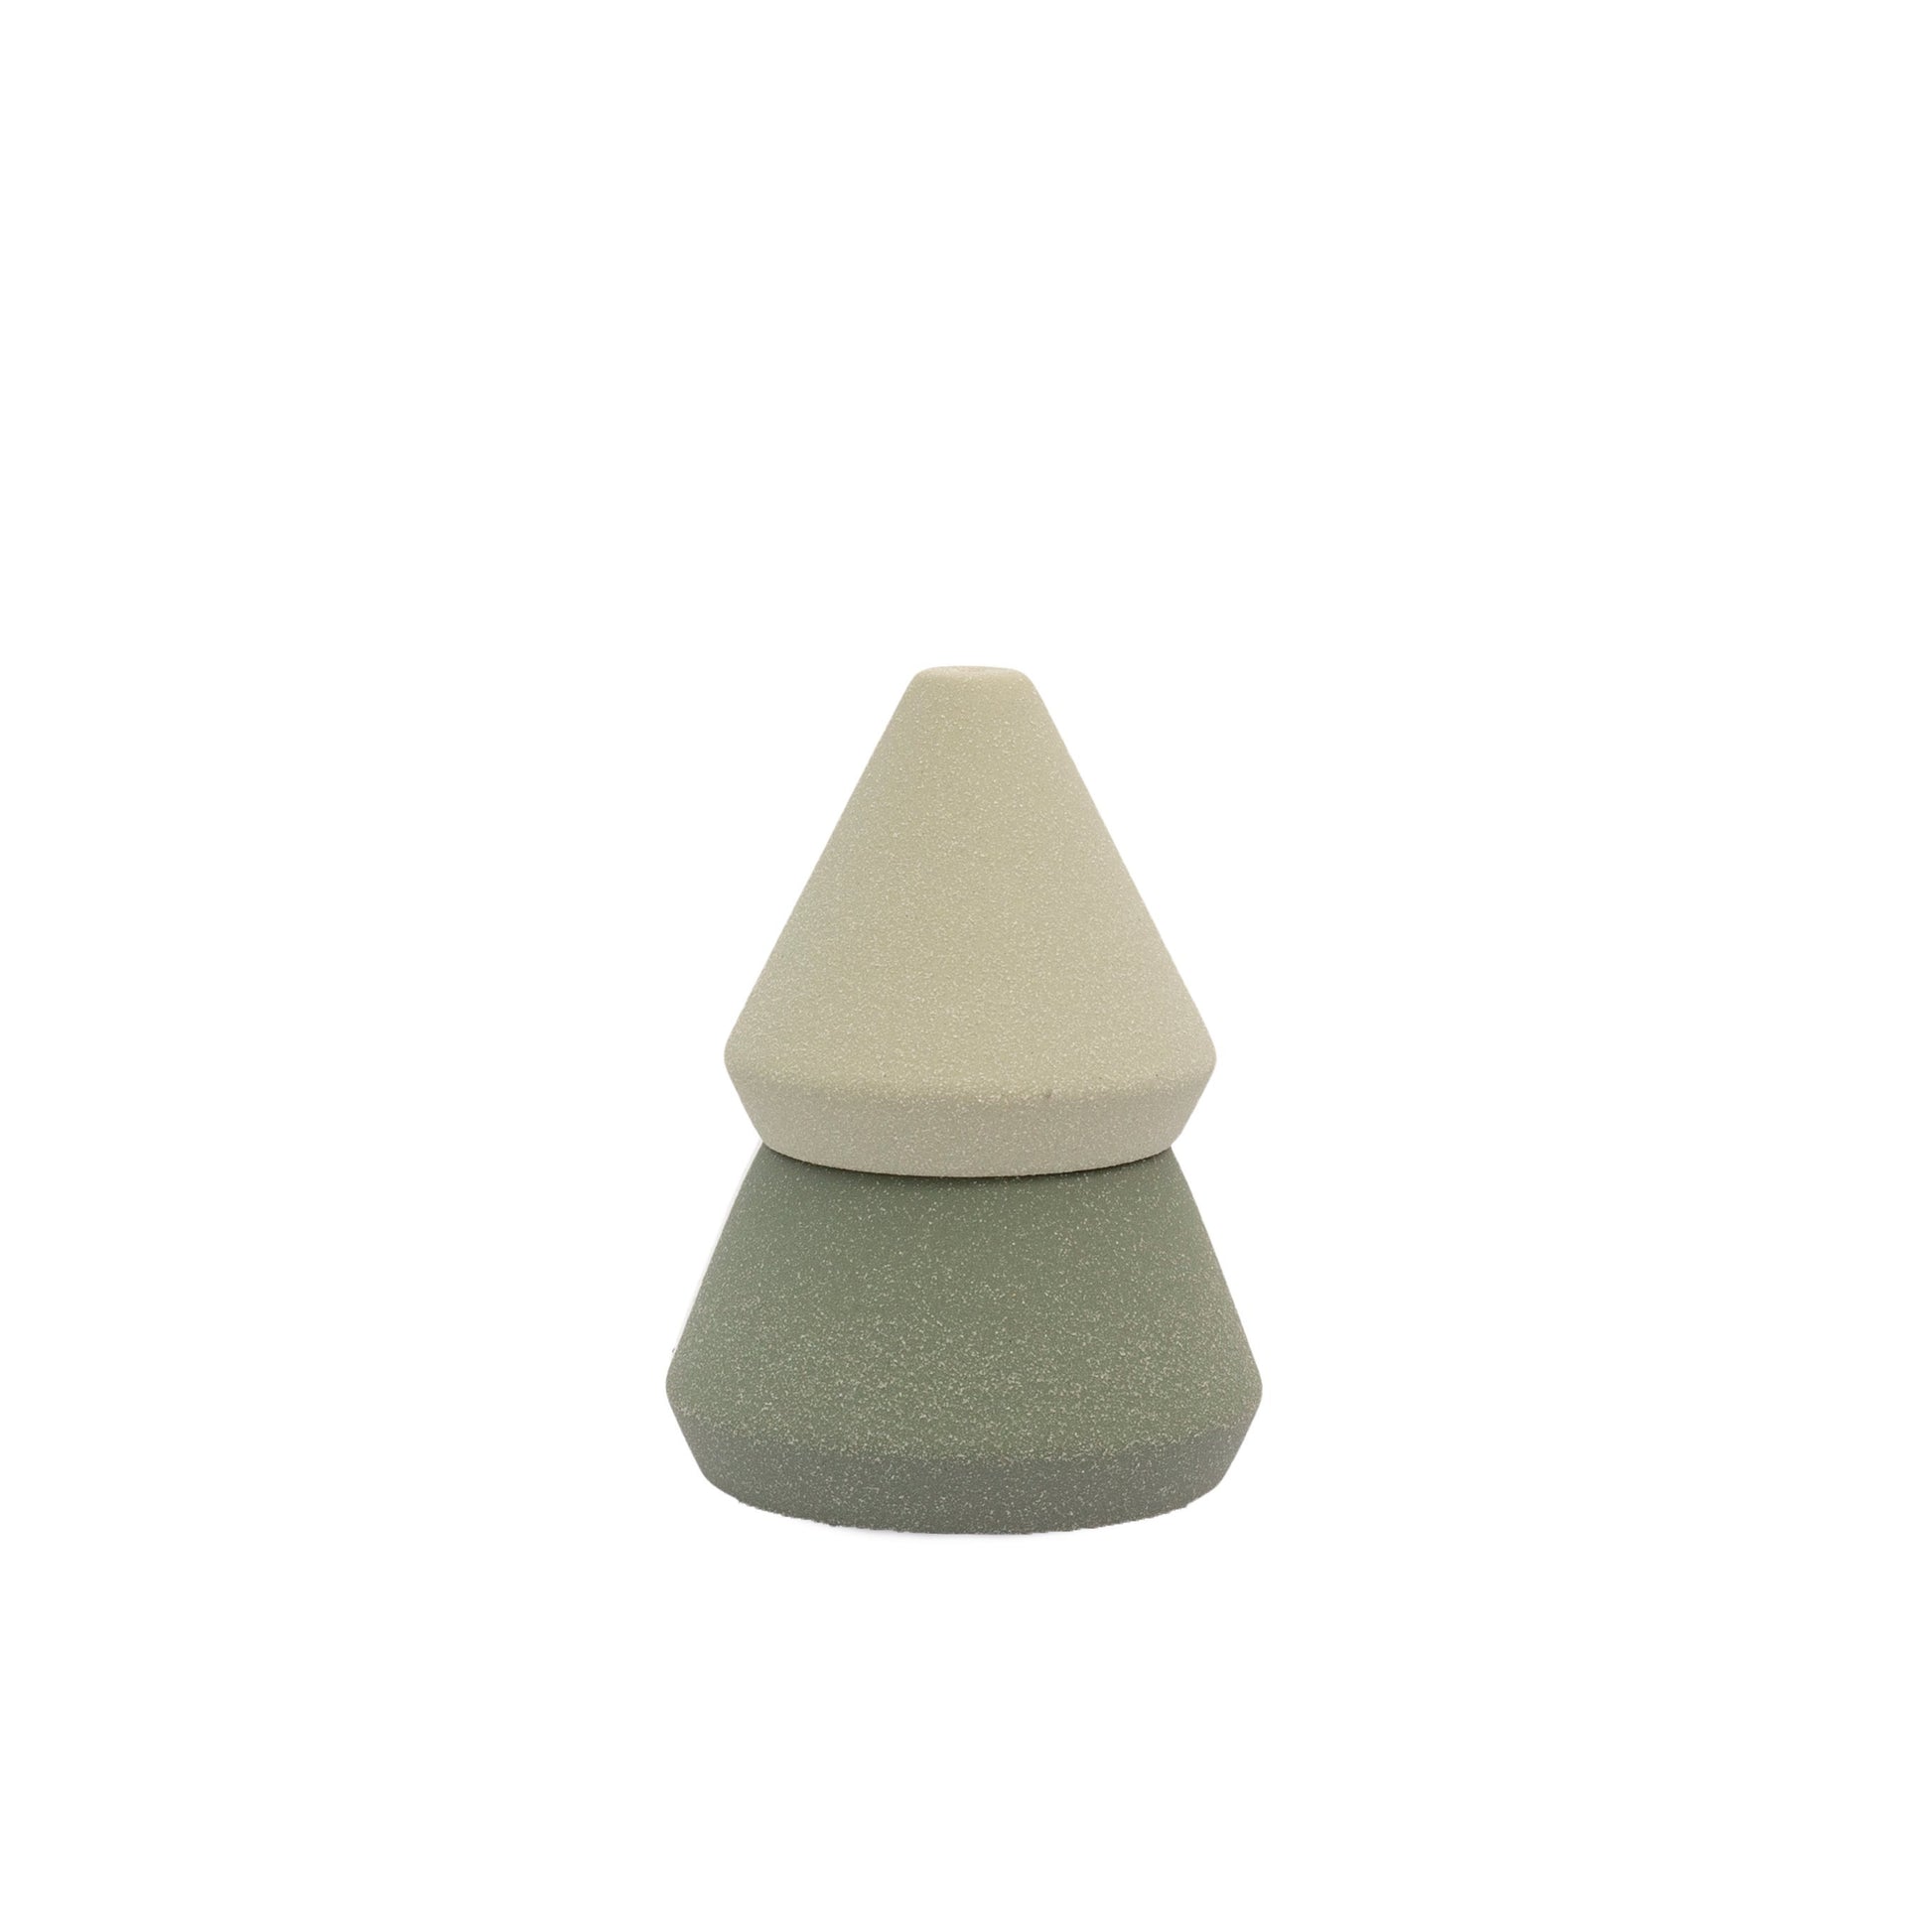 Small Green Tree Stack includes a 5.5 oz. stackable candle and an incense holder; These textured ceramic pieces offer beautiful and functional decor to any holiday space